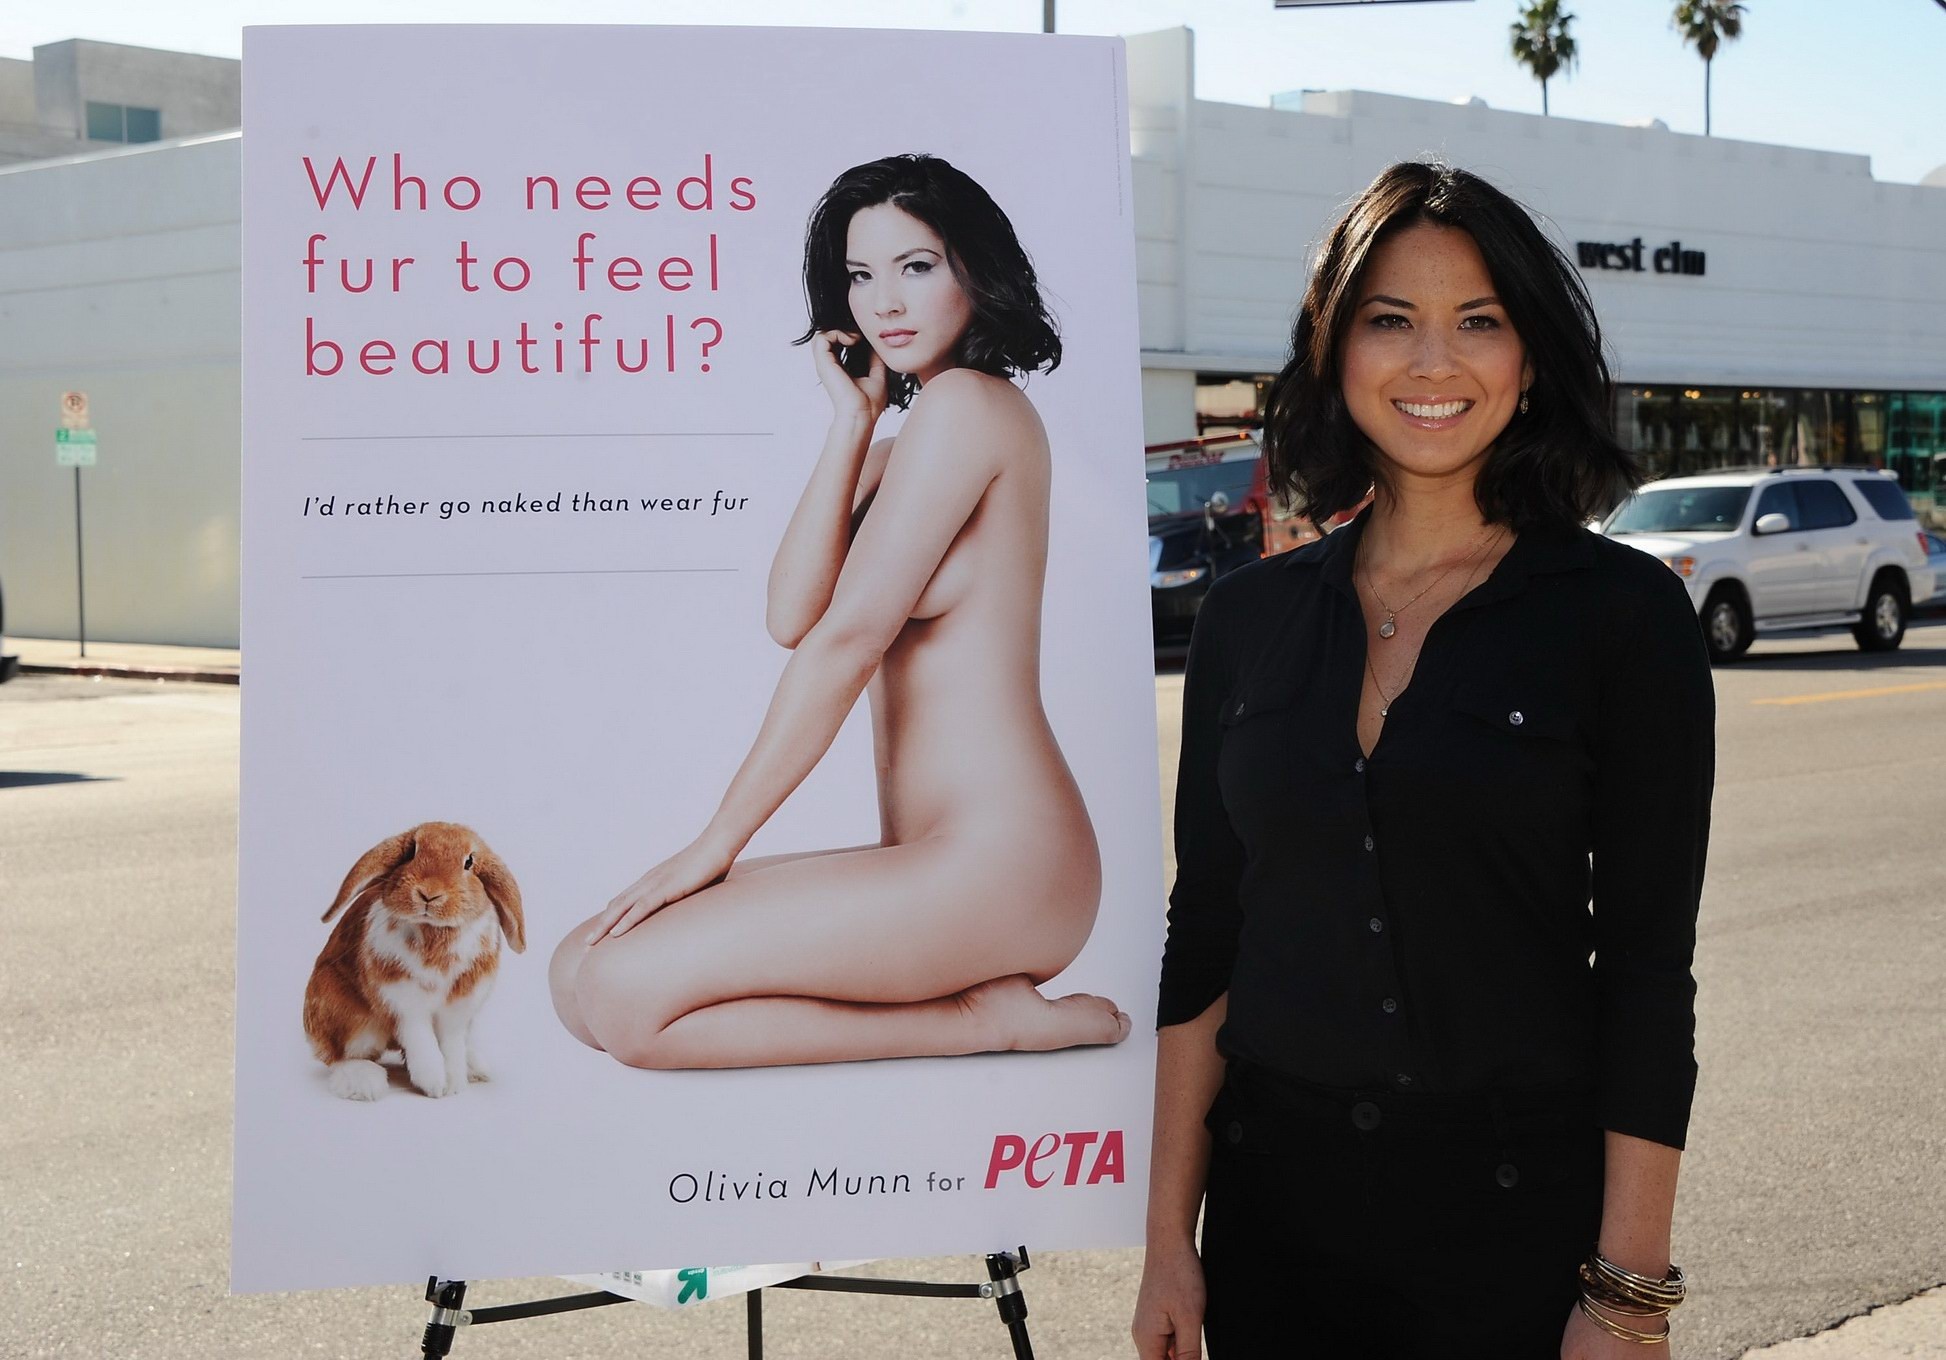 Olivia Munn fully nude but hiding for the new PETA ad campaign #75276611